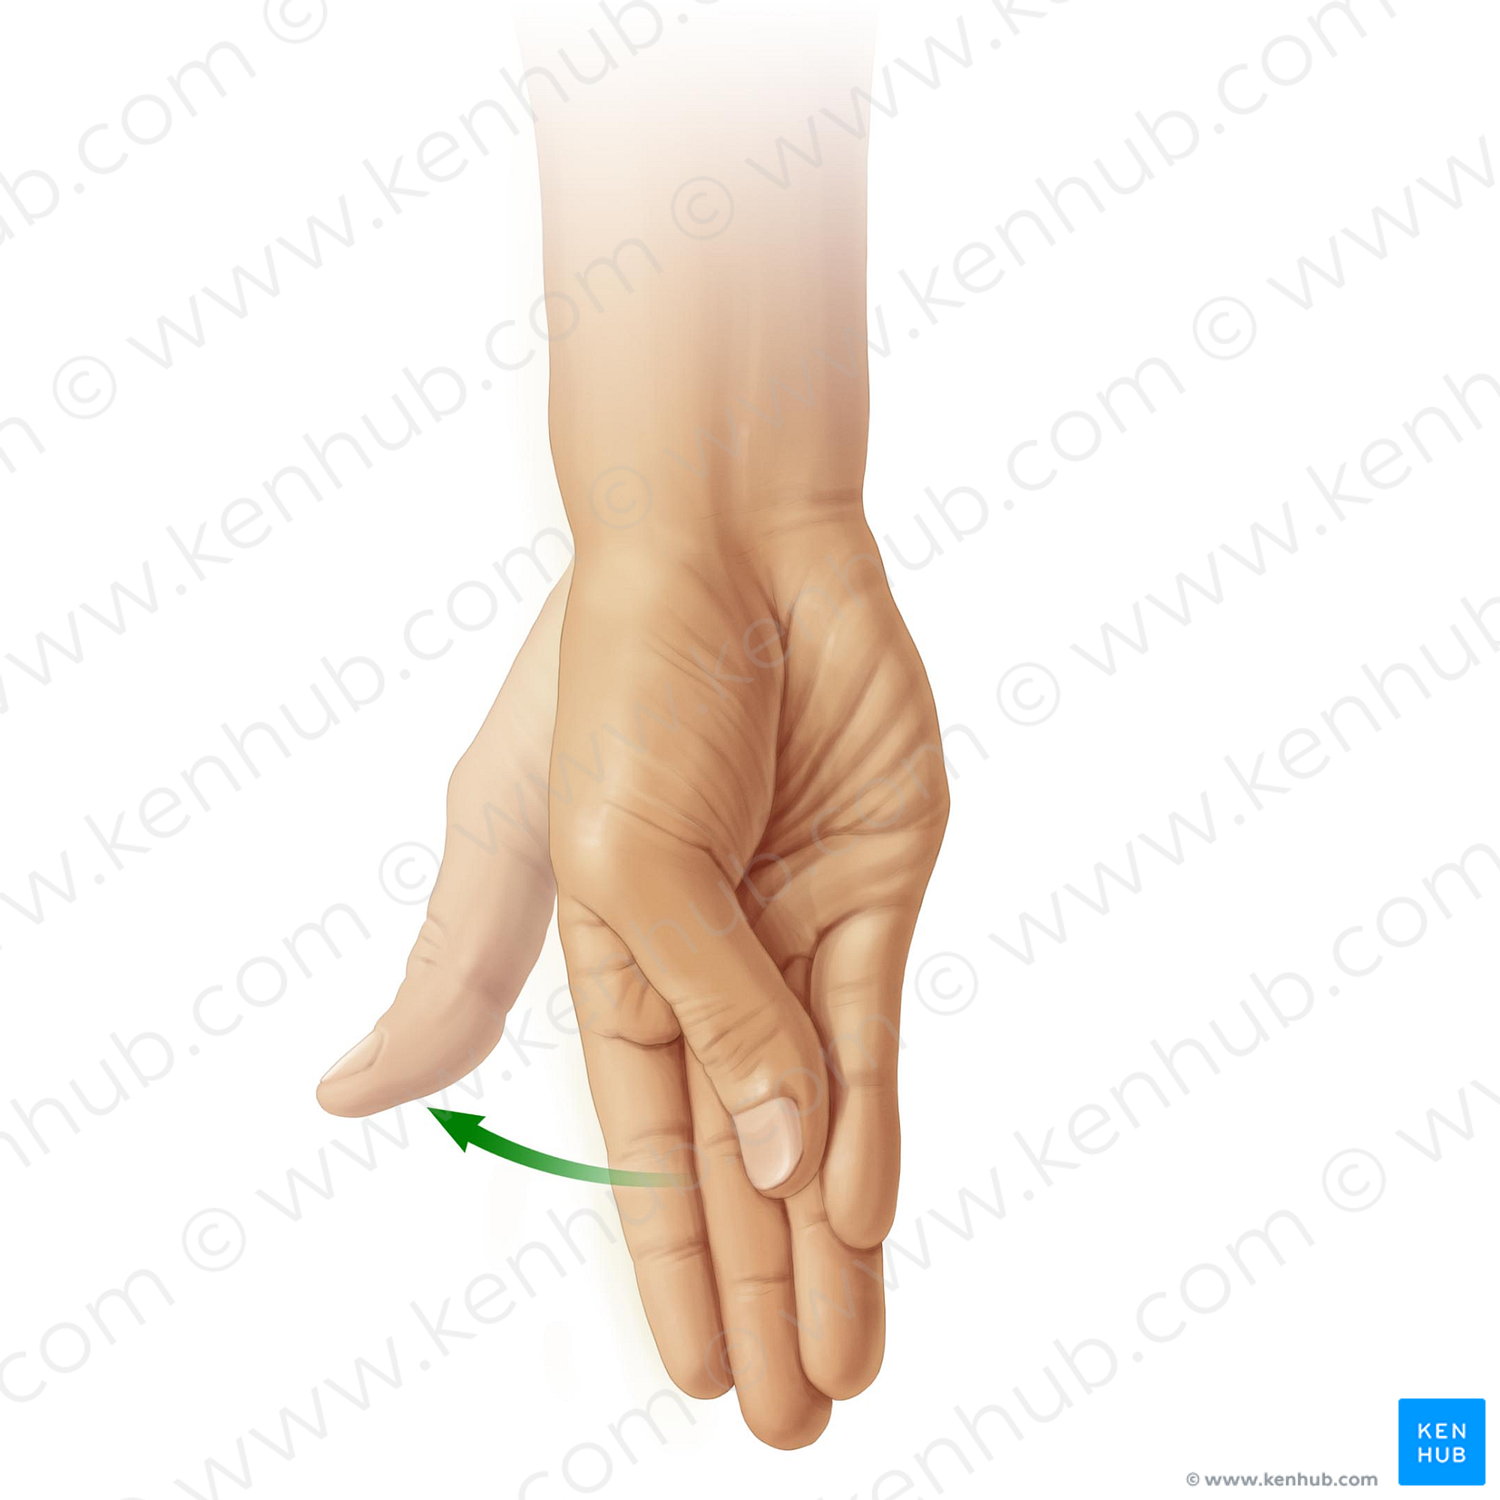 Reposition of thumb (#11035)